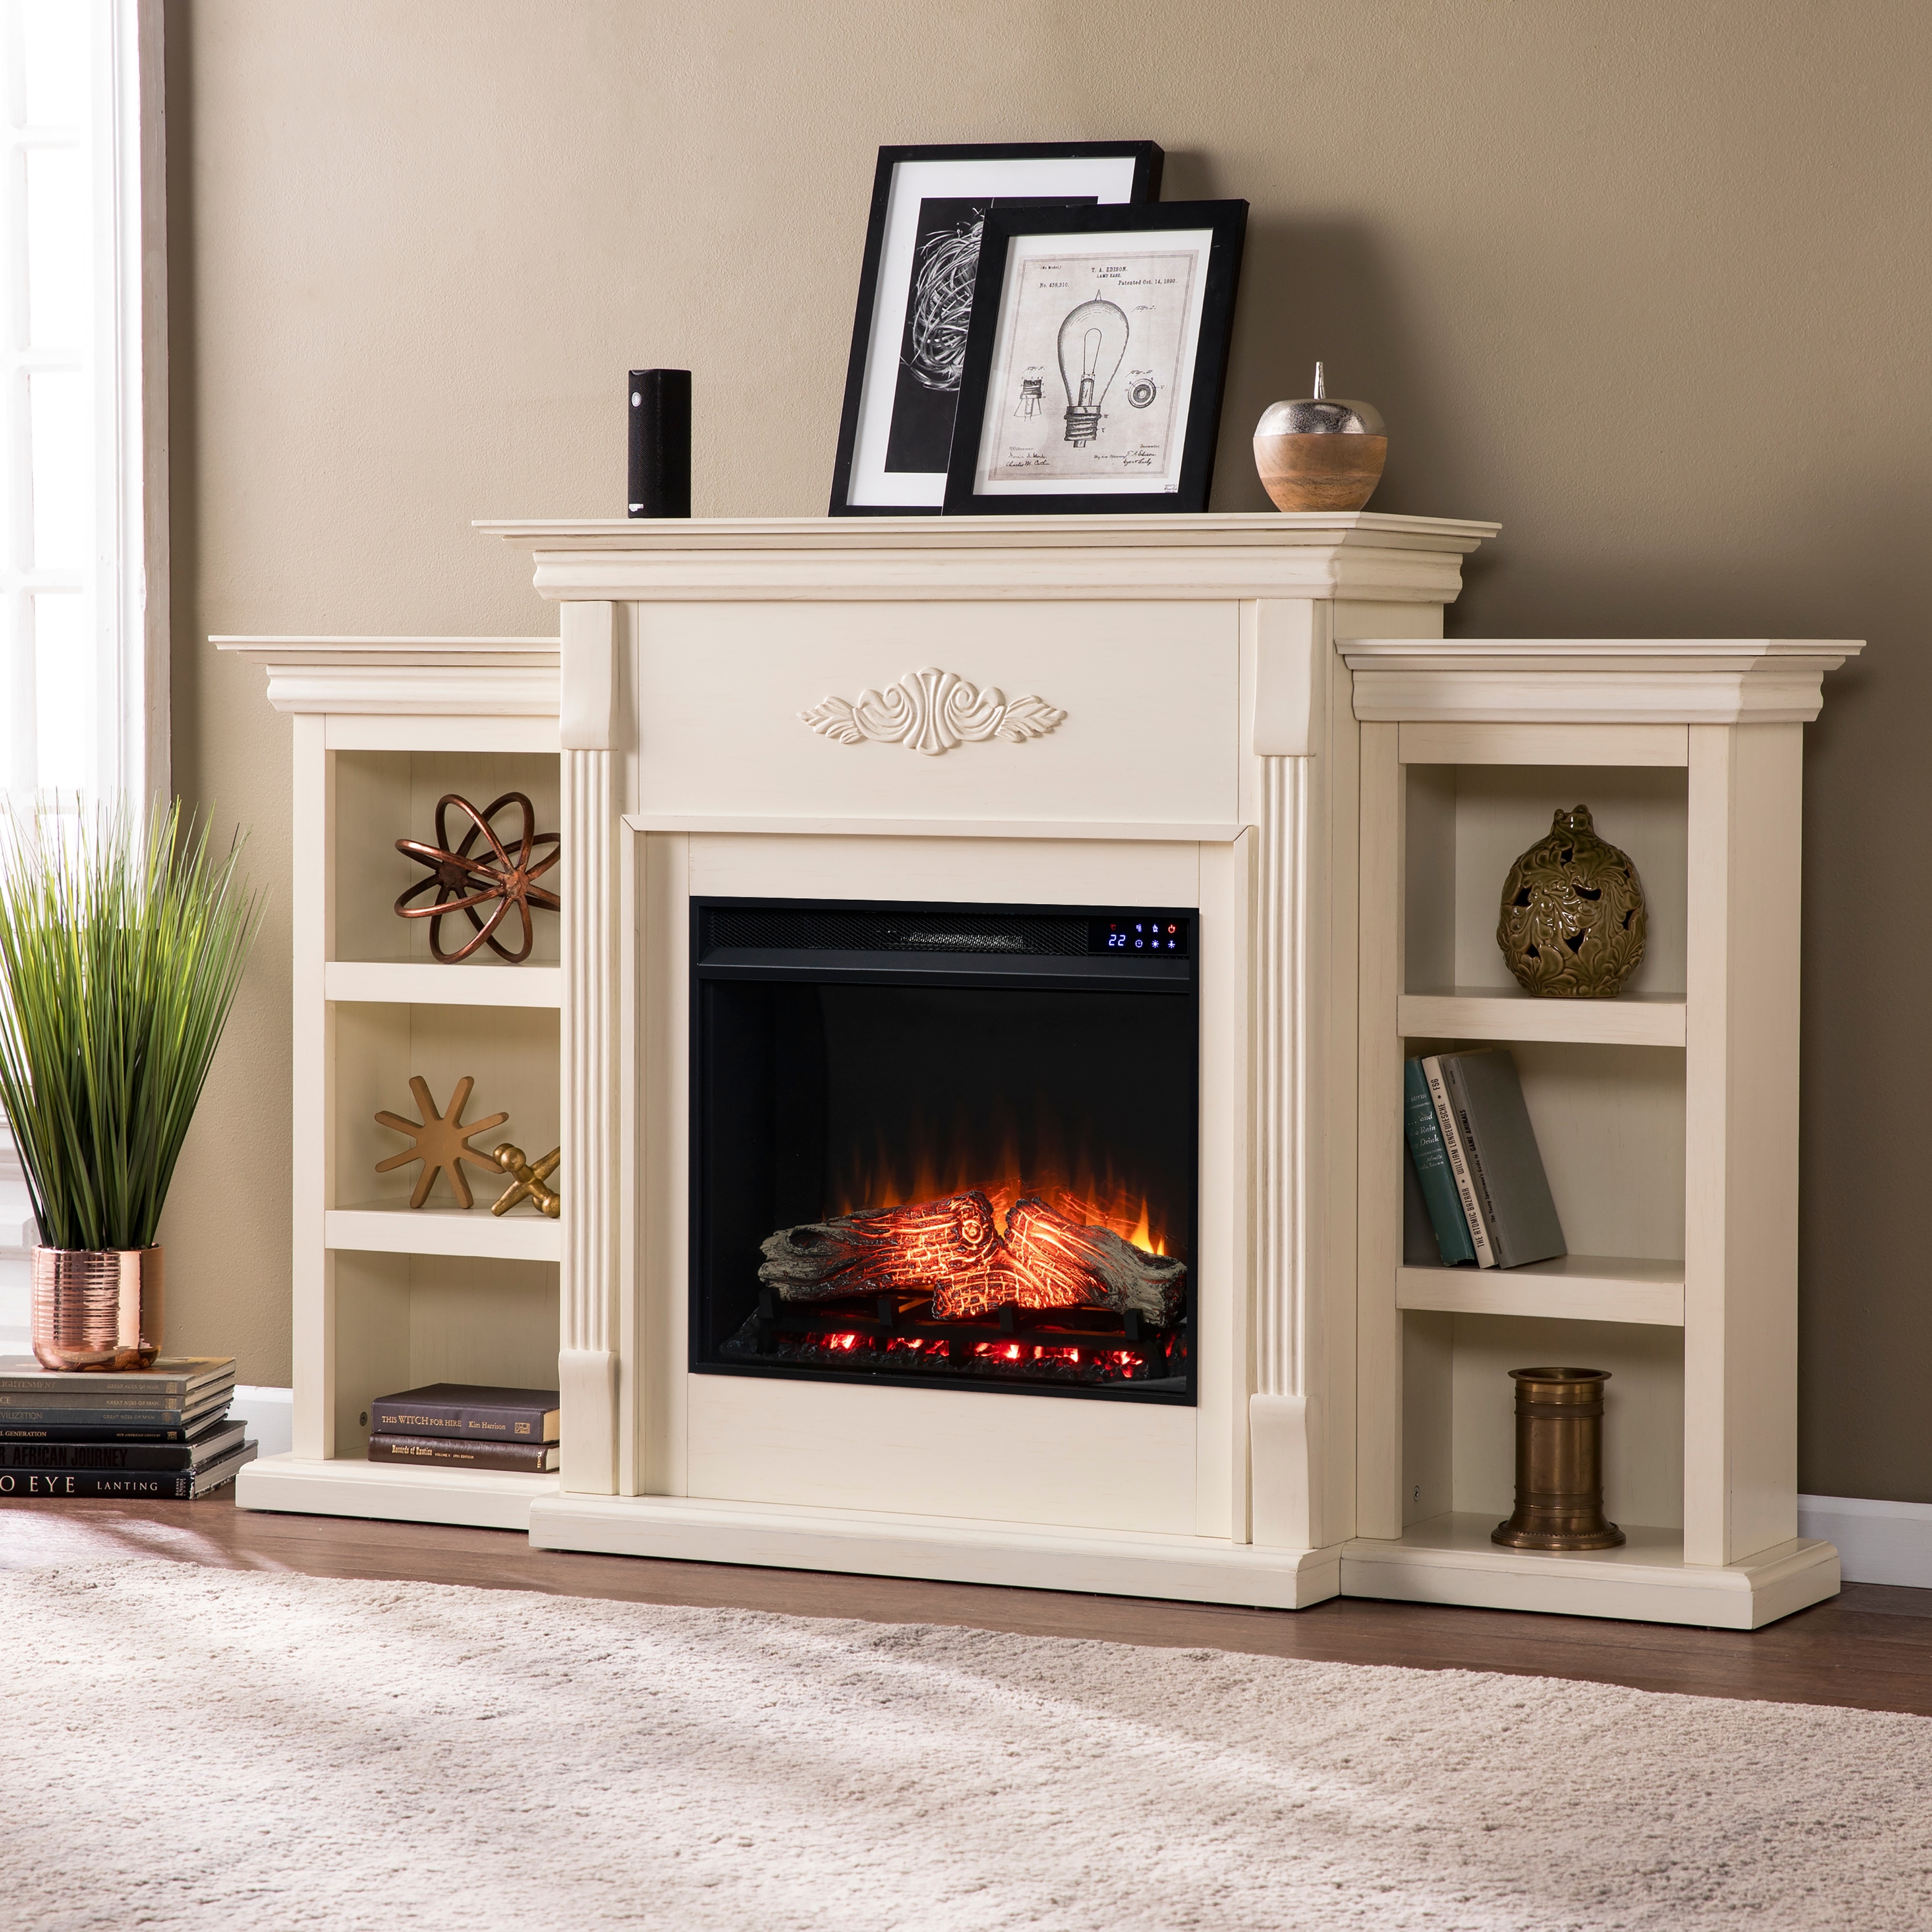 SEI Furniture Forbes Electric Fireplace 70-inch Ivory Mantel with Bookcase Storage